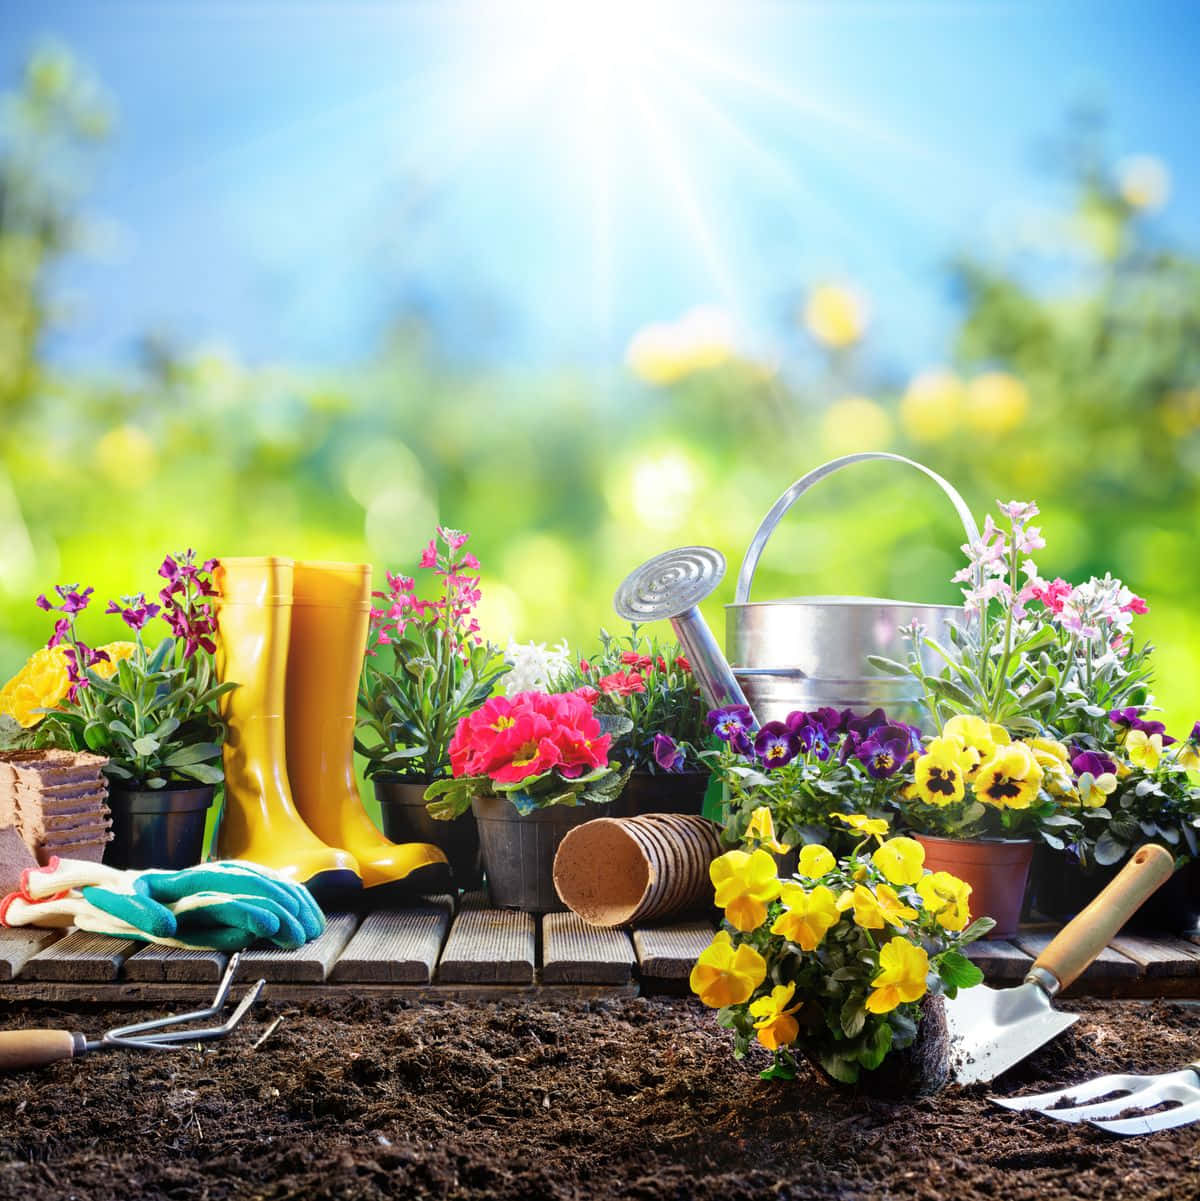 Discover the Joy of Gardening